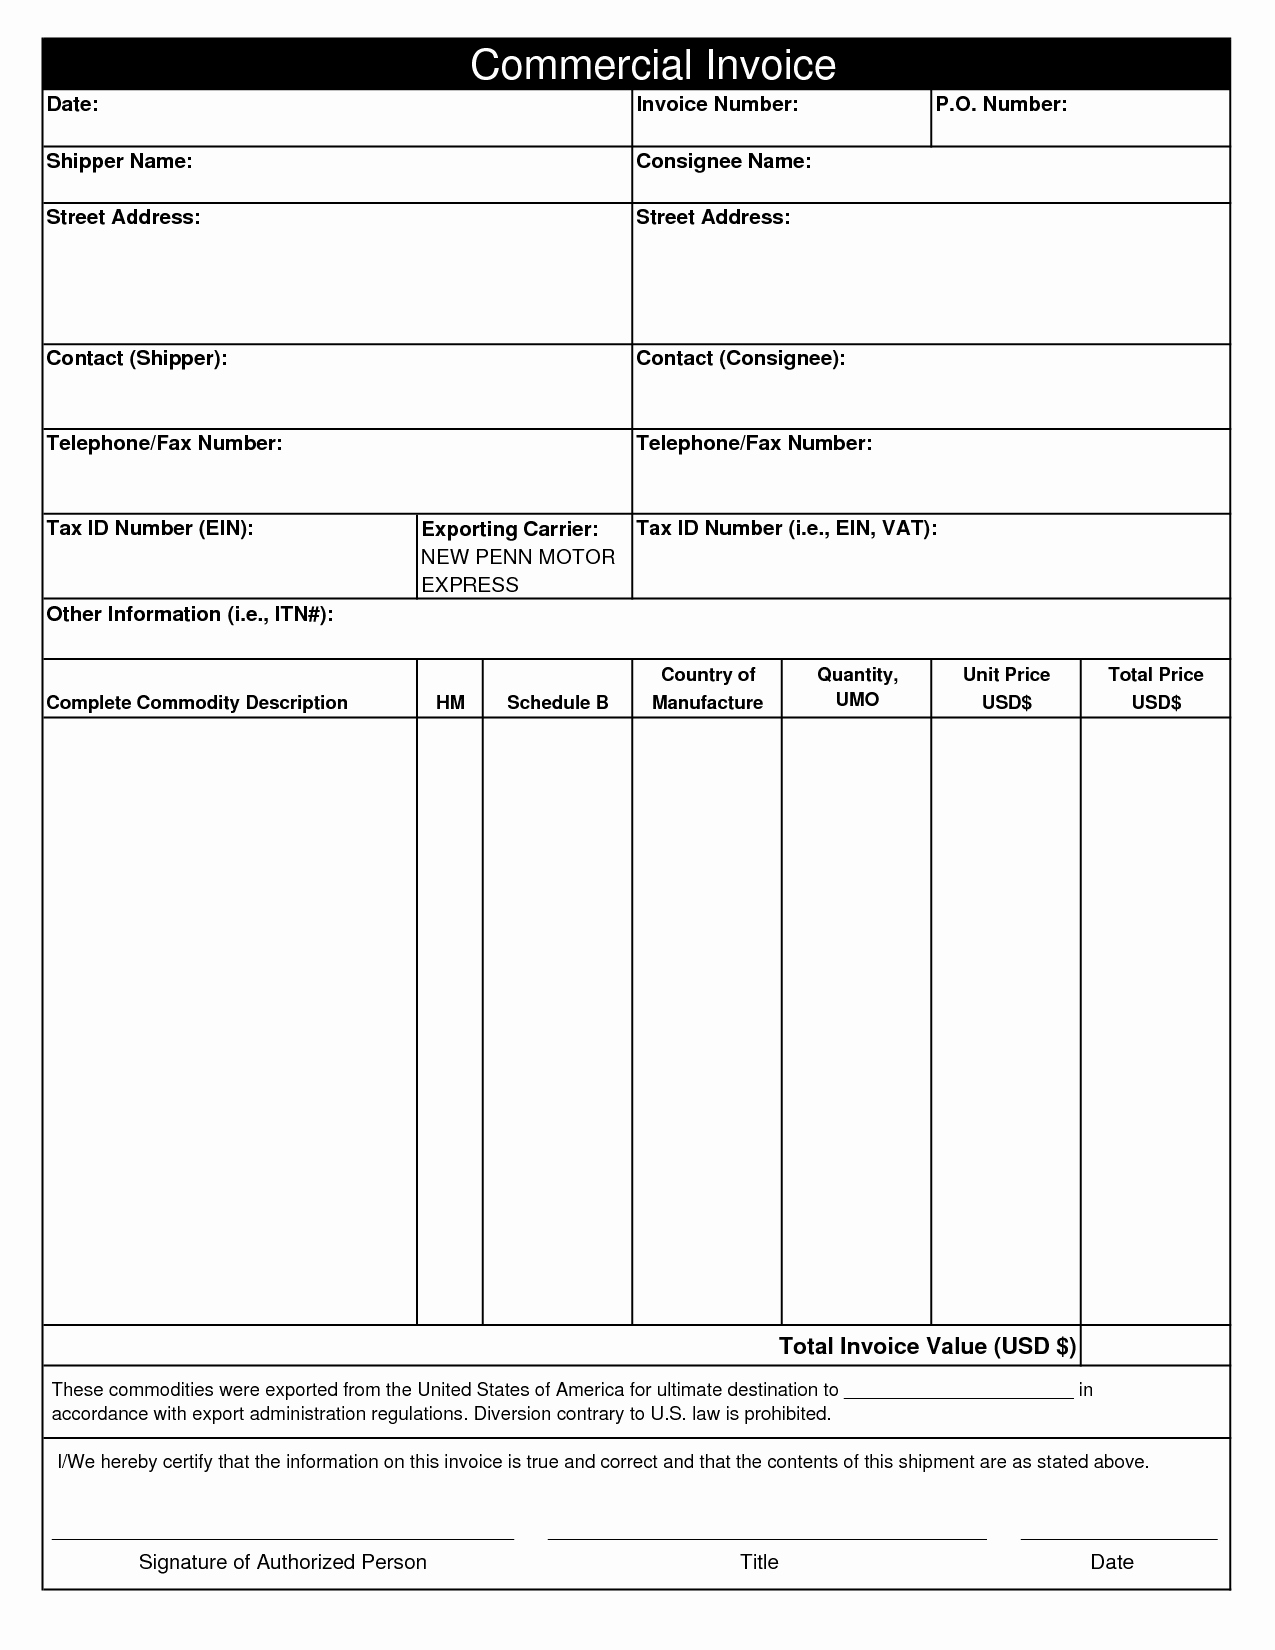 mercial invoice template free 2163